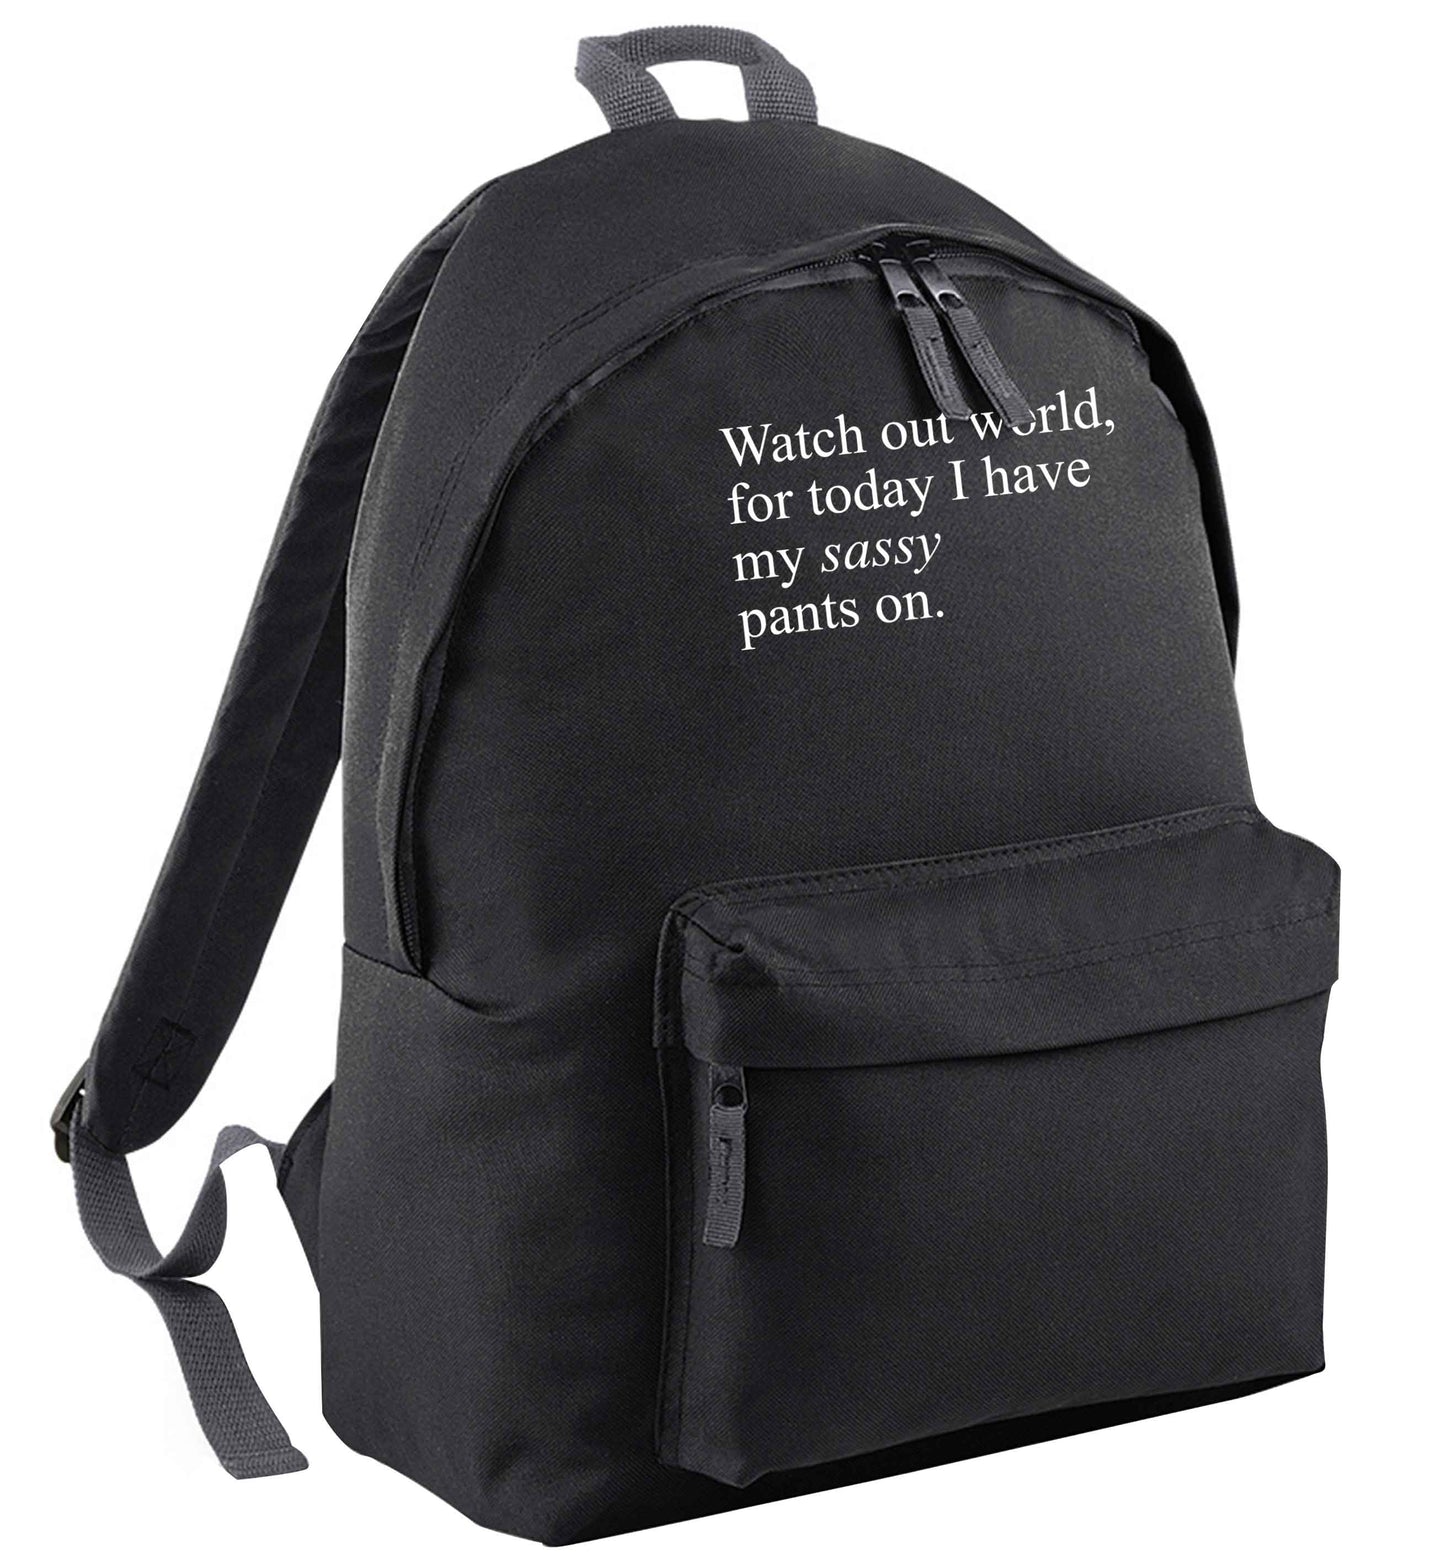 Watch out world for today I have my sassy pants on | Adults backpack